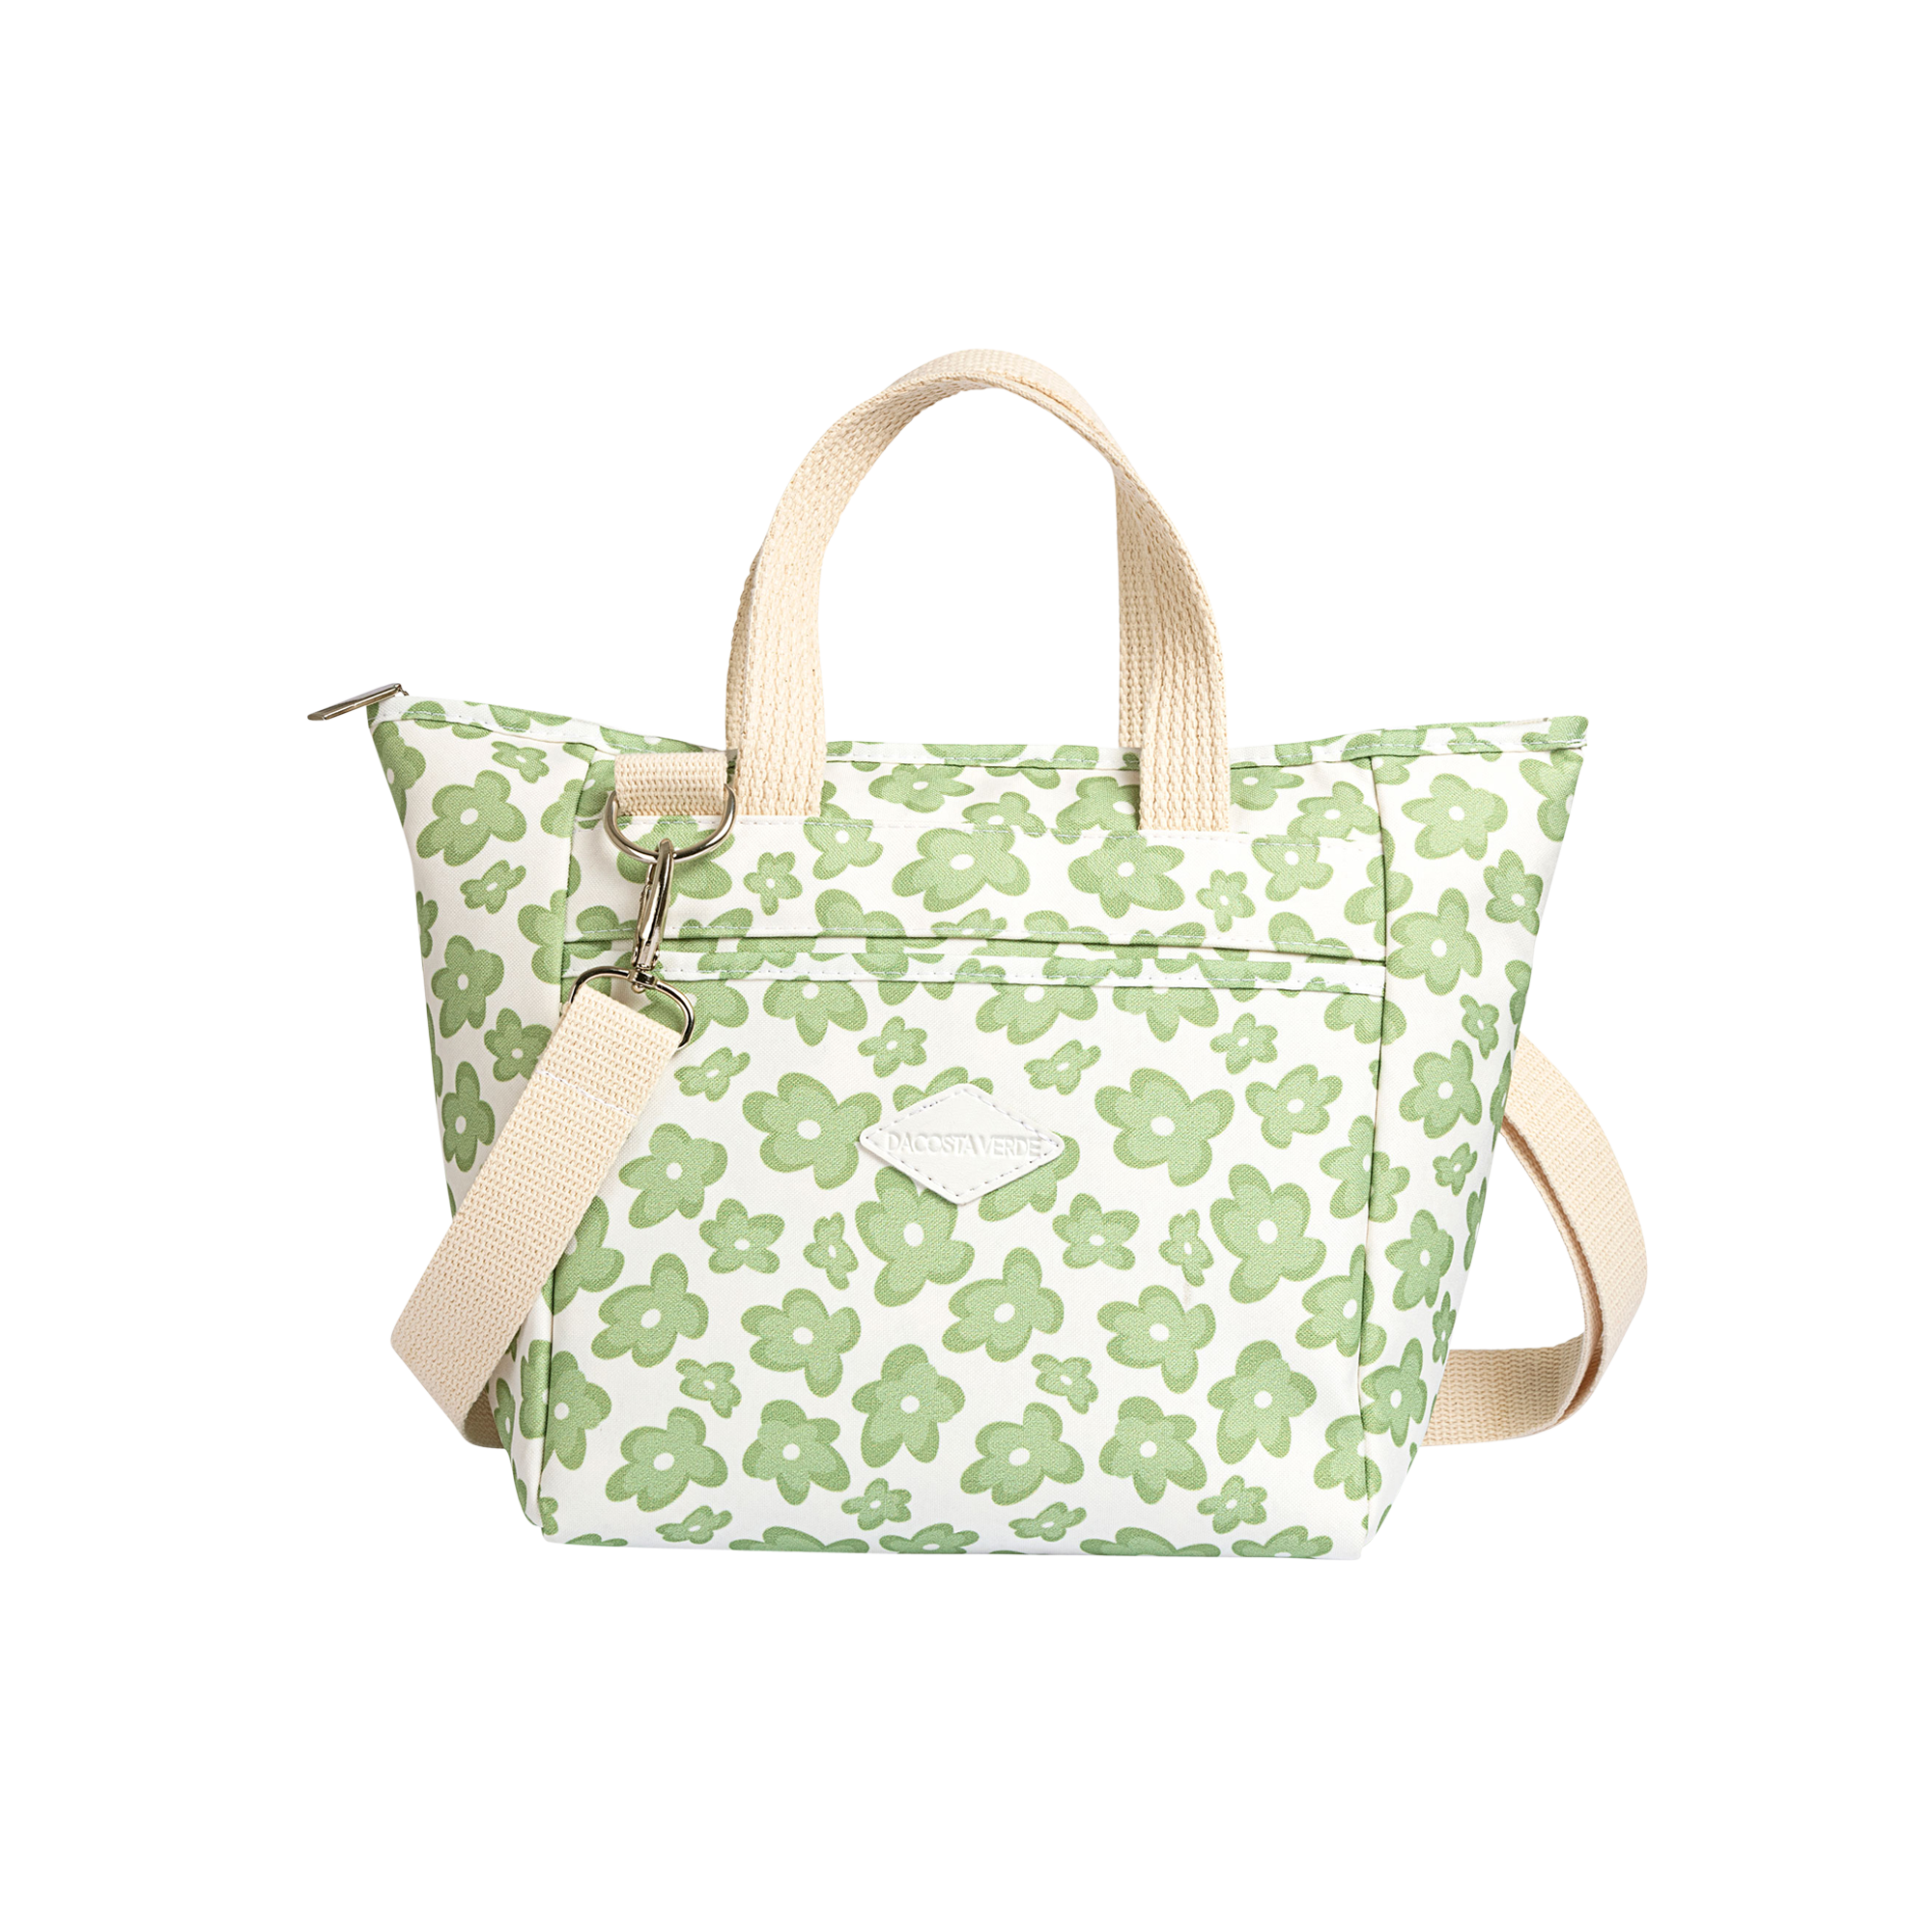 lunch bag tote